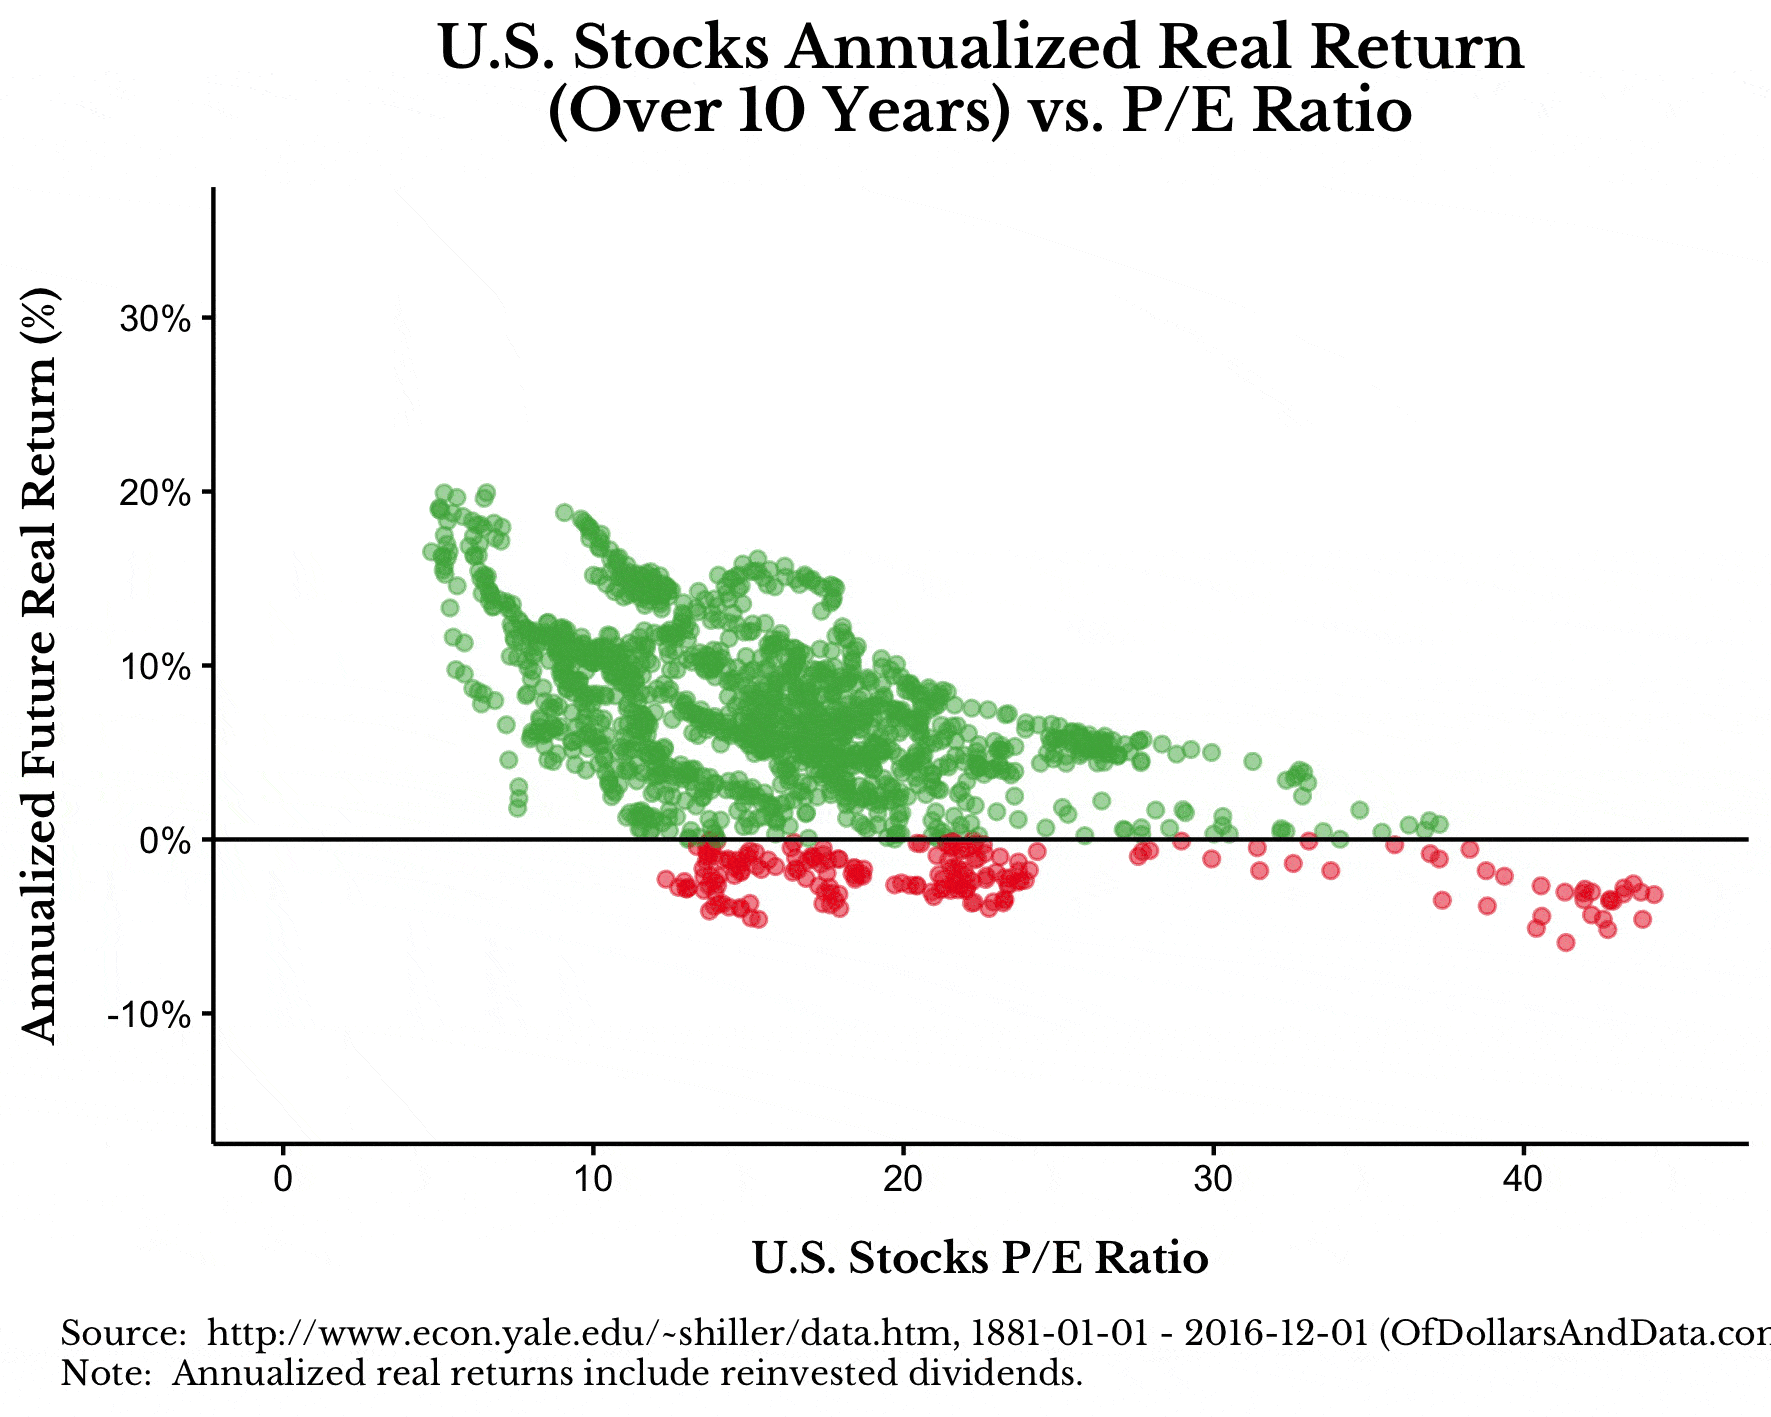 GIF of annualized future US stock returns against US stock price-to-earnings ratio from 5 to 30 years (in 5 year increments)